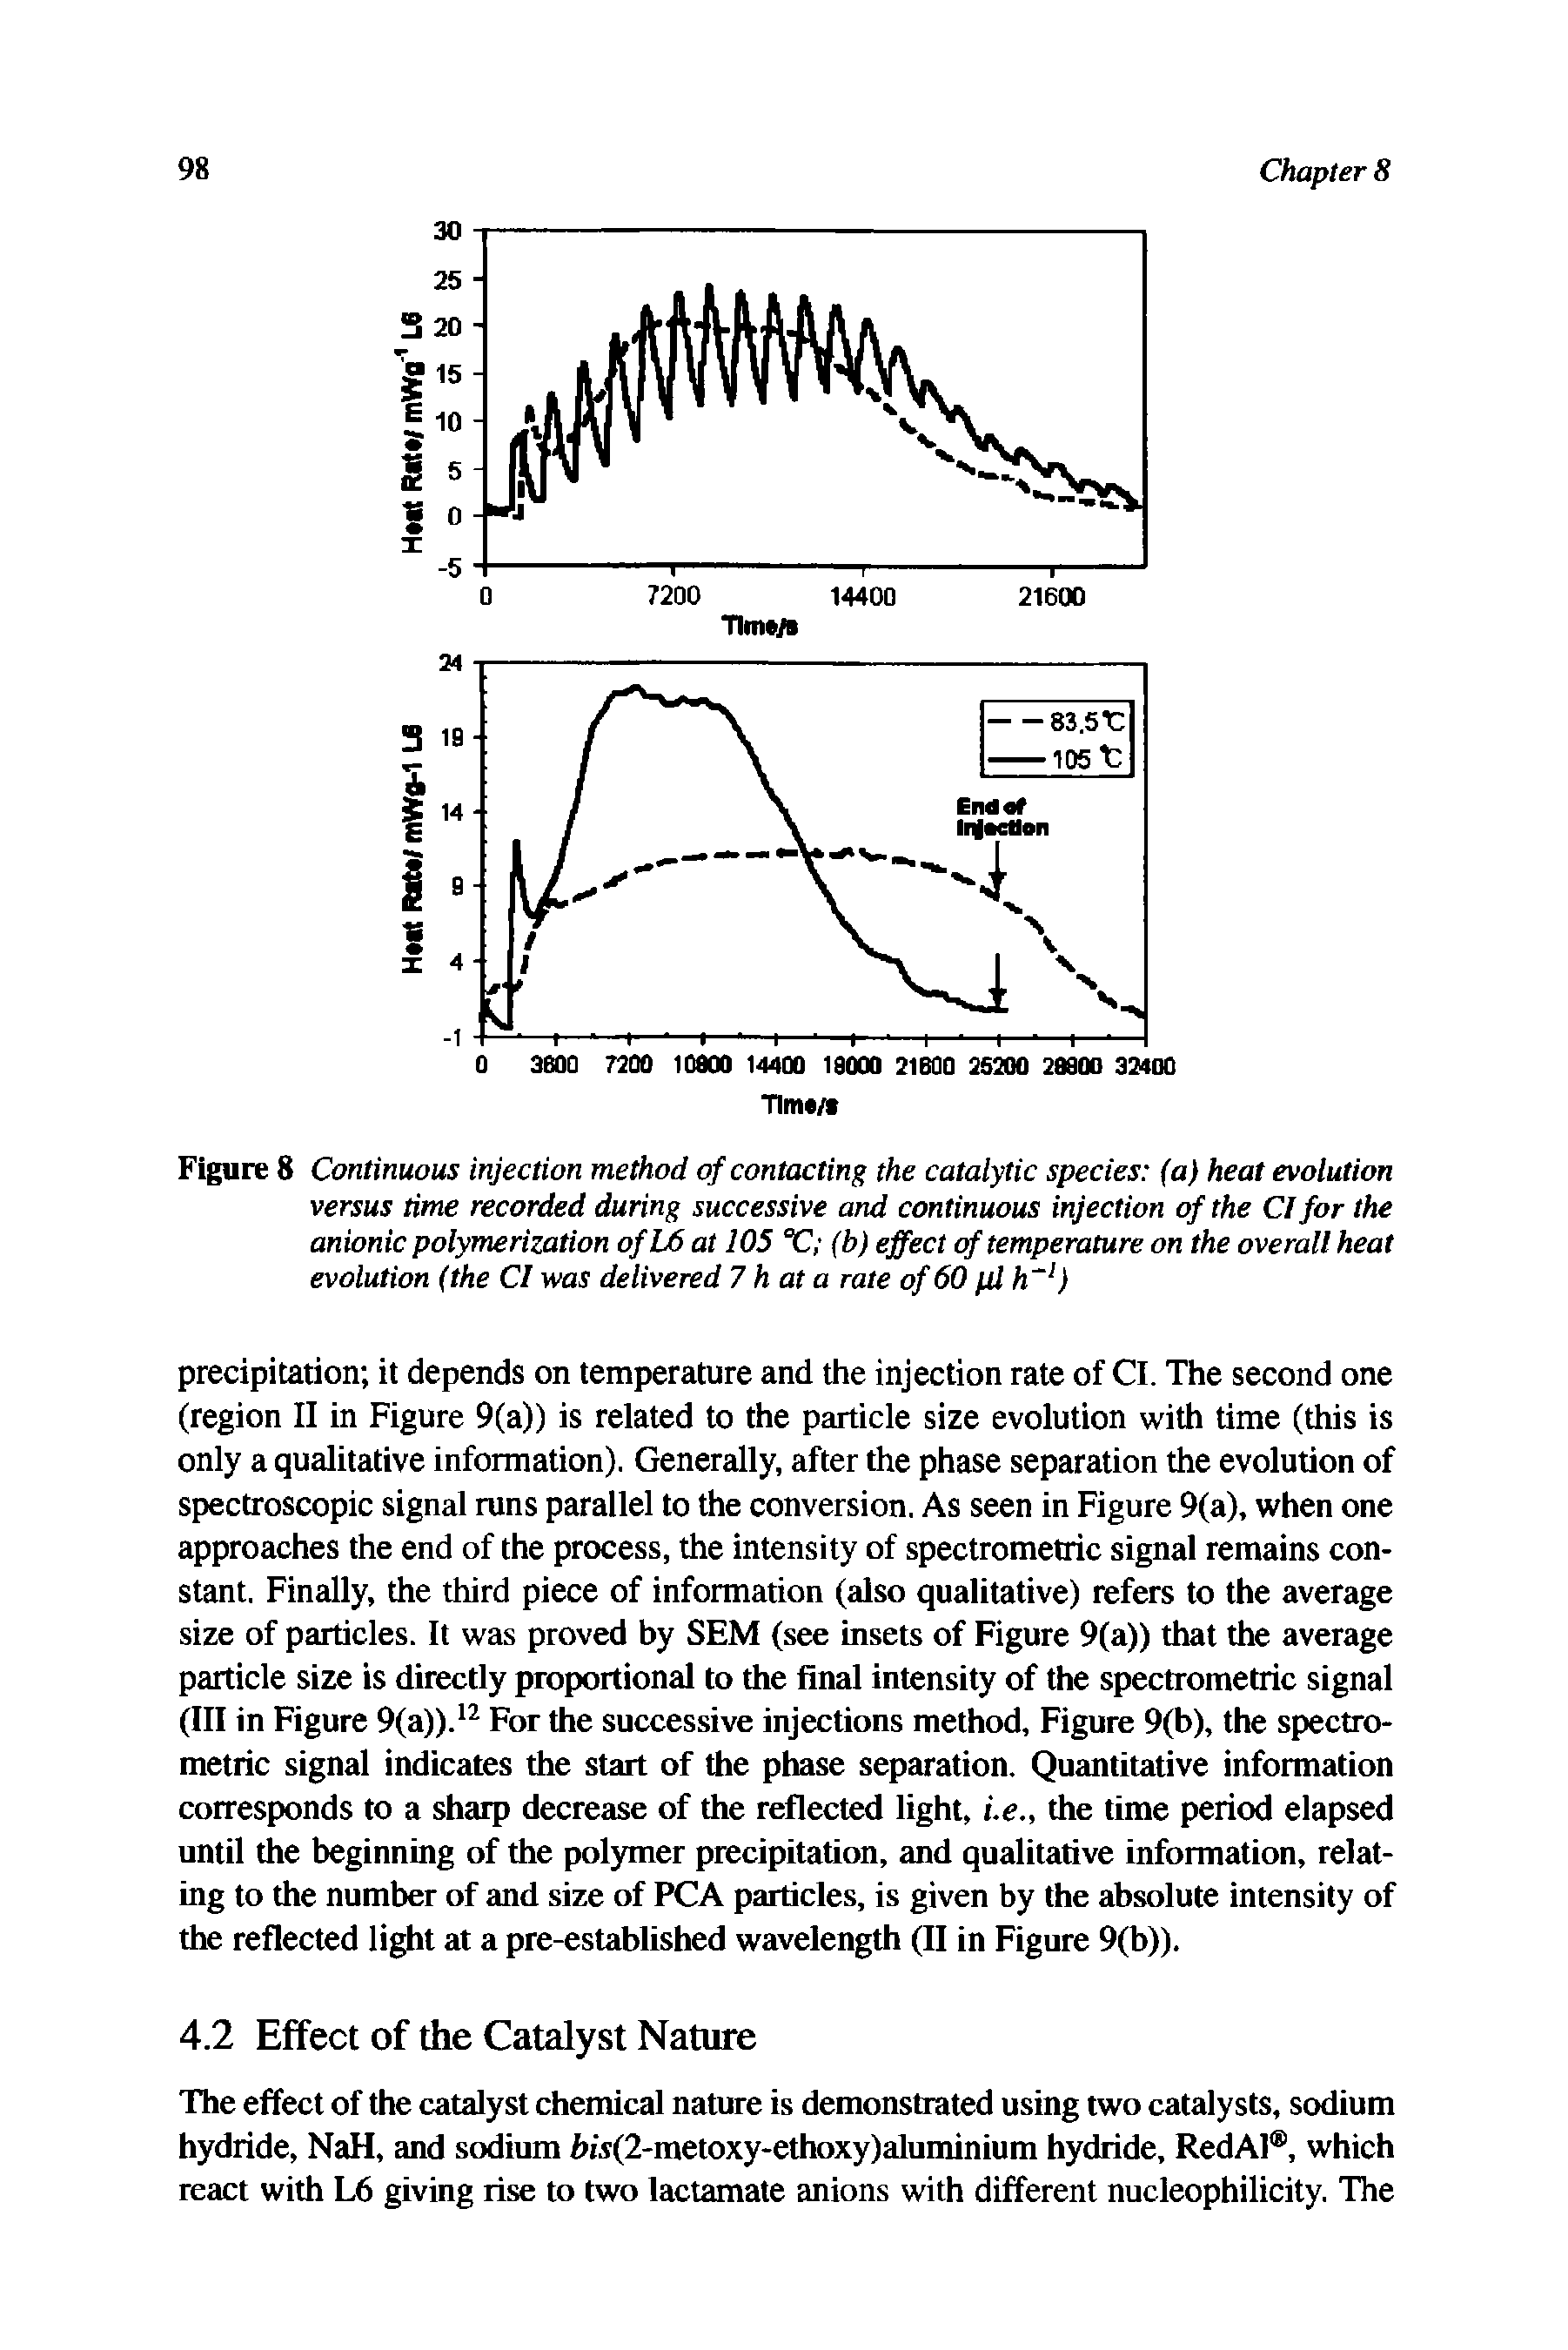 Figure 8 Continuous injection method of contacting the catalytic species fa) heat evolution versus time recorded during successive and continuous injection of the Cl for the anionic polymerization ofL6 at 105 °C (b) effect of temperature on the overall heat evolution (the Cl was delivered 7 h at a rate of 60 pi h )...